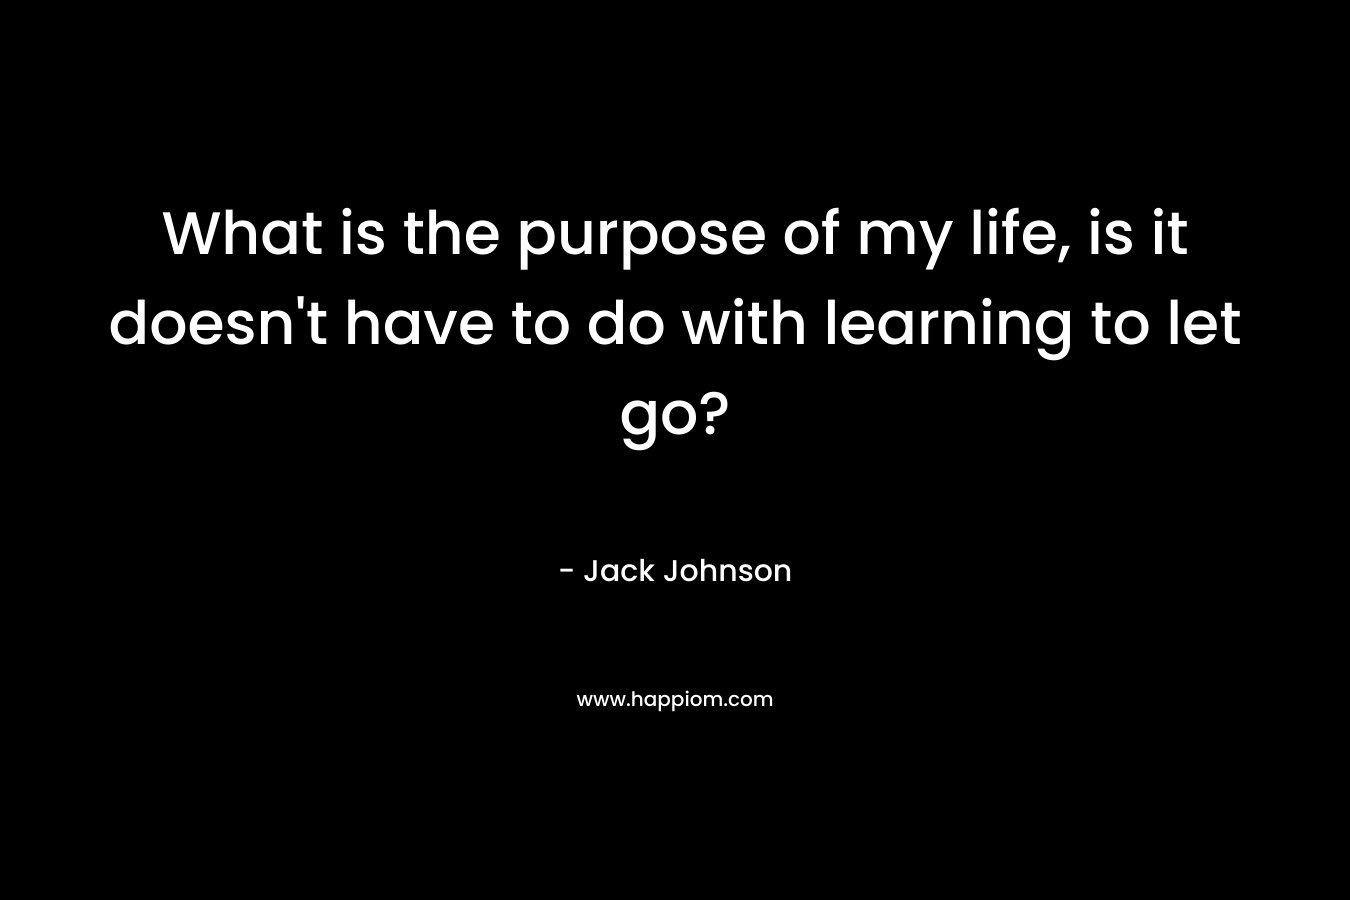 What is the purpose of my life, is it doesn’t have to do with learning to let go? – Jack Johnson